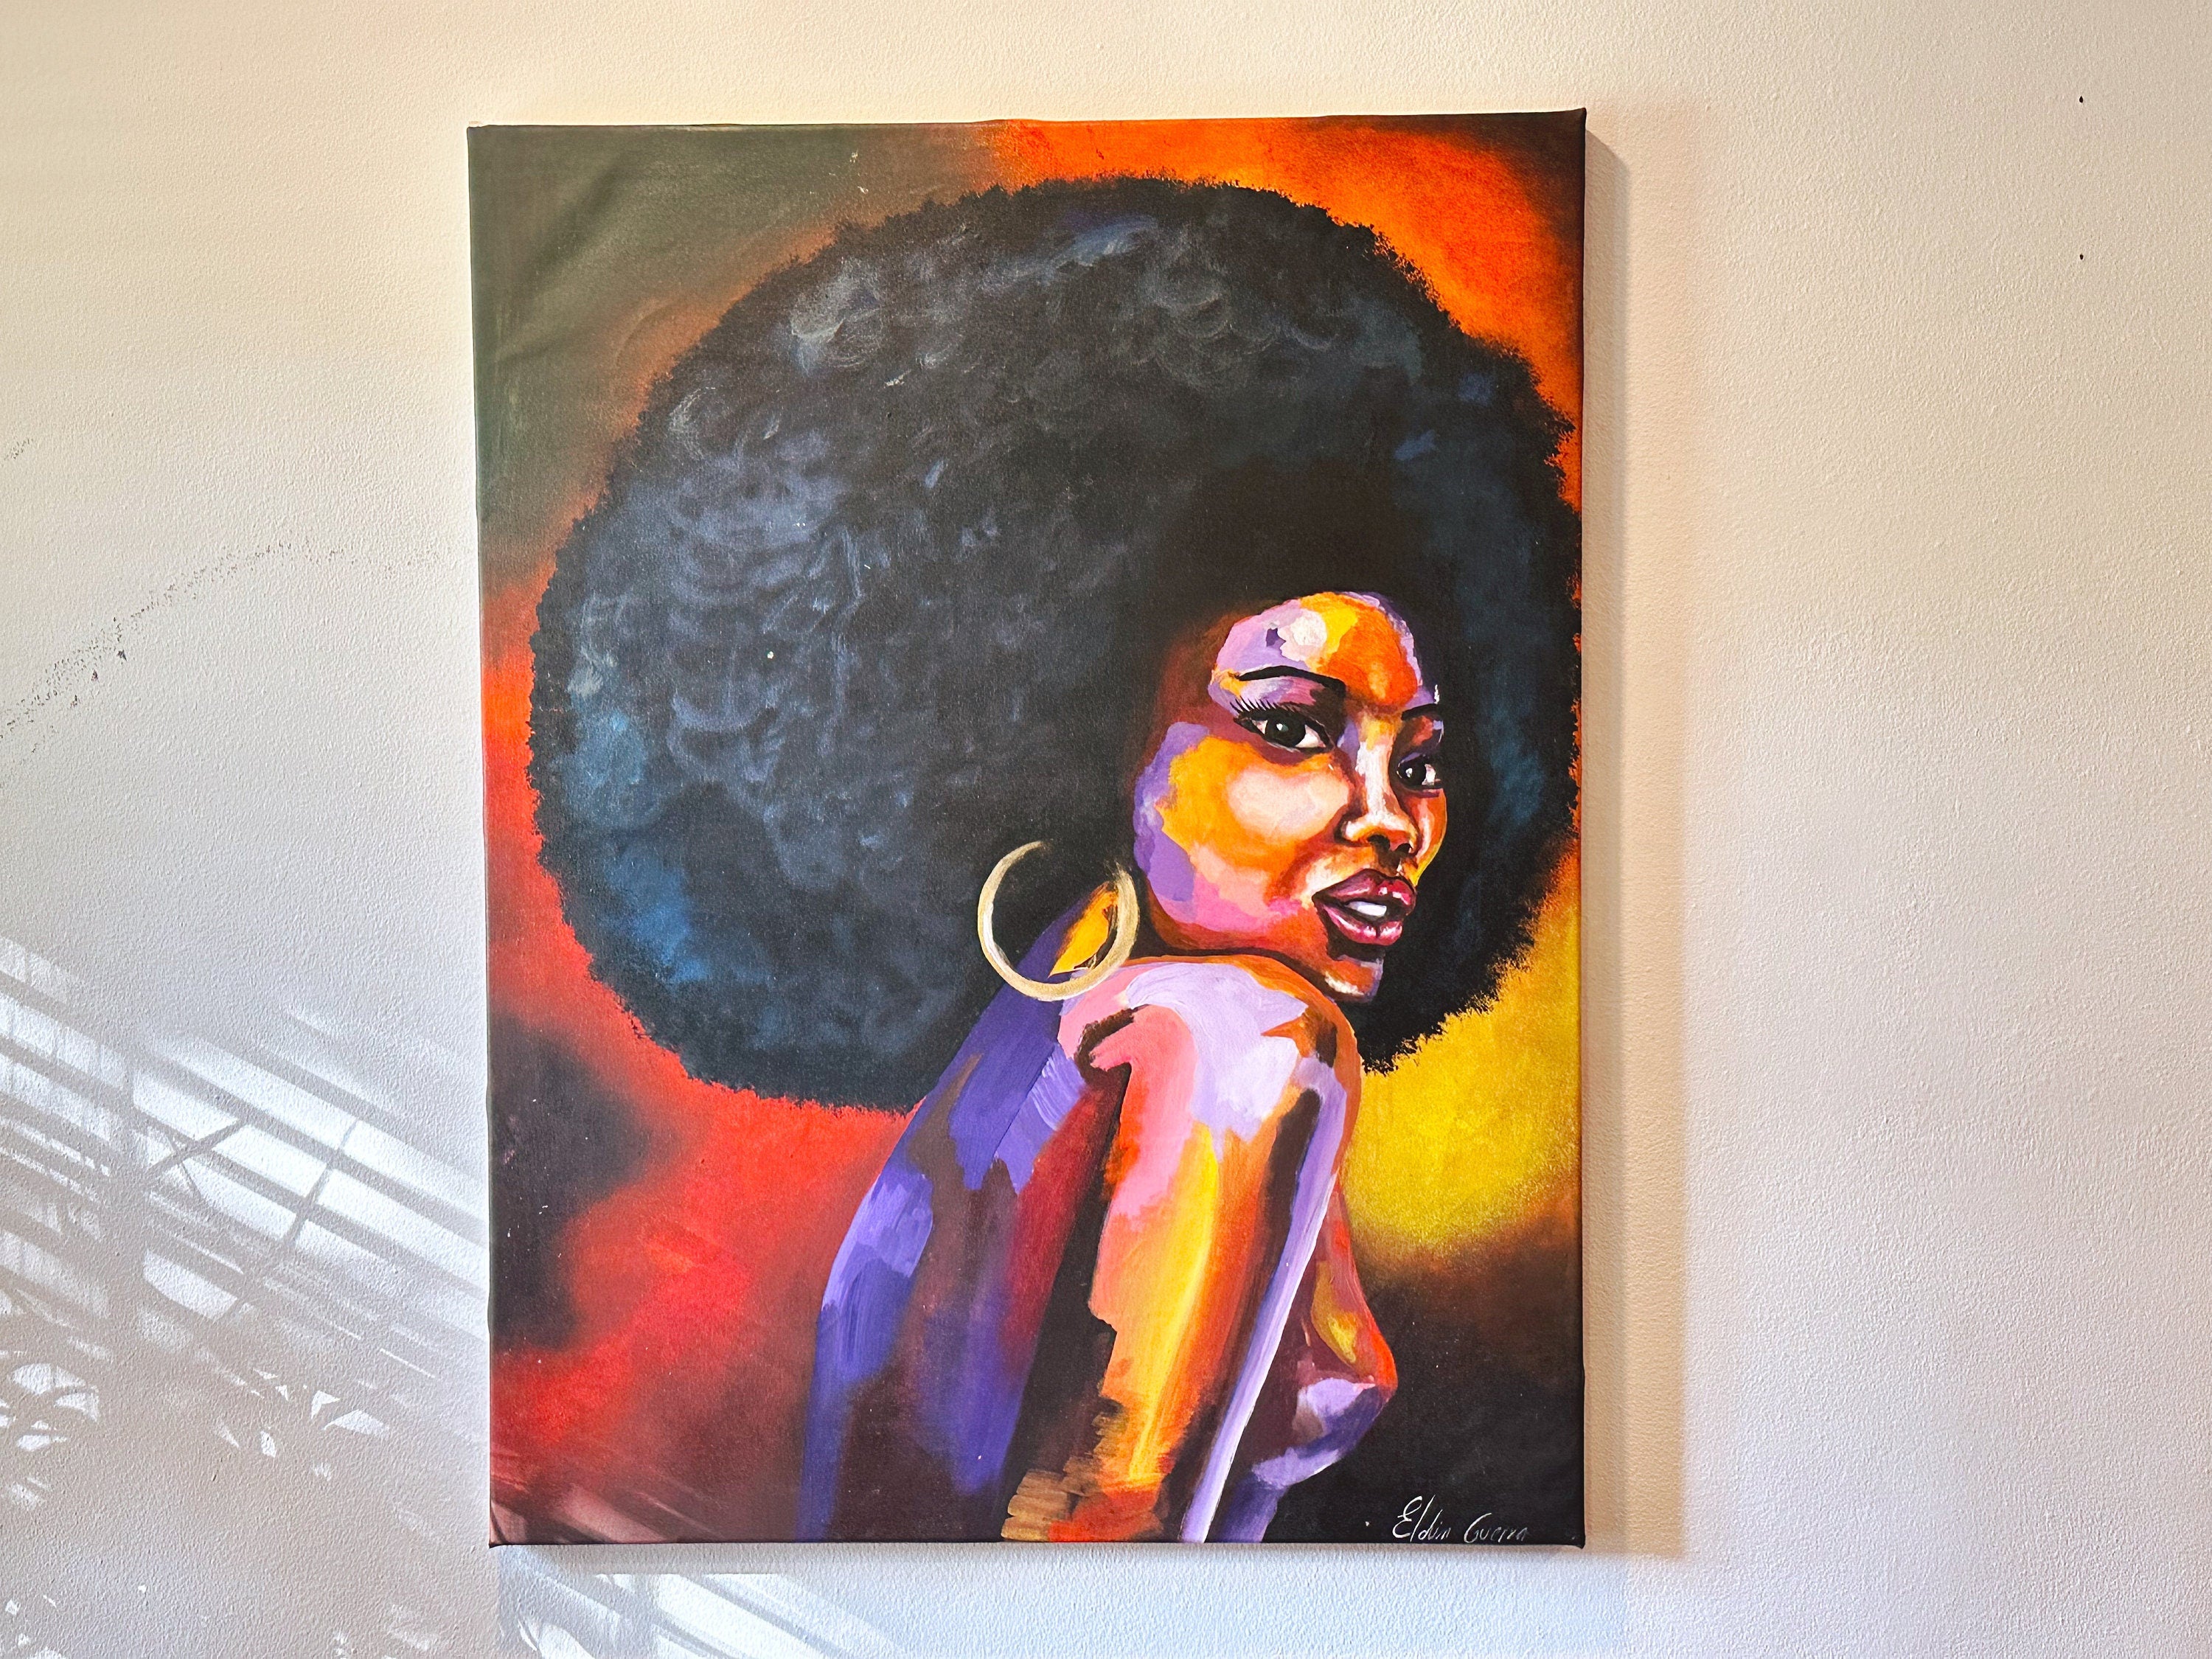 Original Large Oil painting on Canvas of Beautiful African Woman 42"x32" | Signed by Columbian Artist | Colorful Gallery Wall Decor